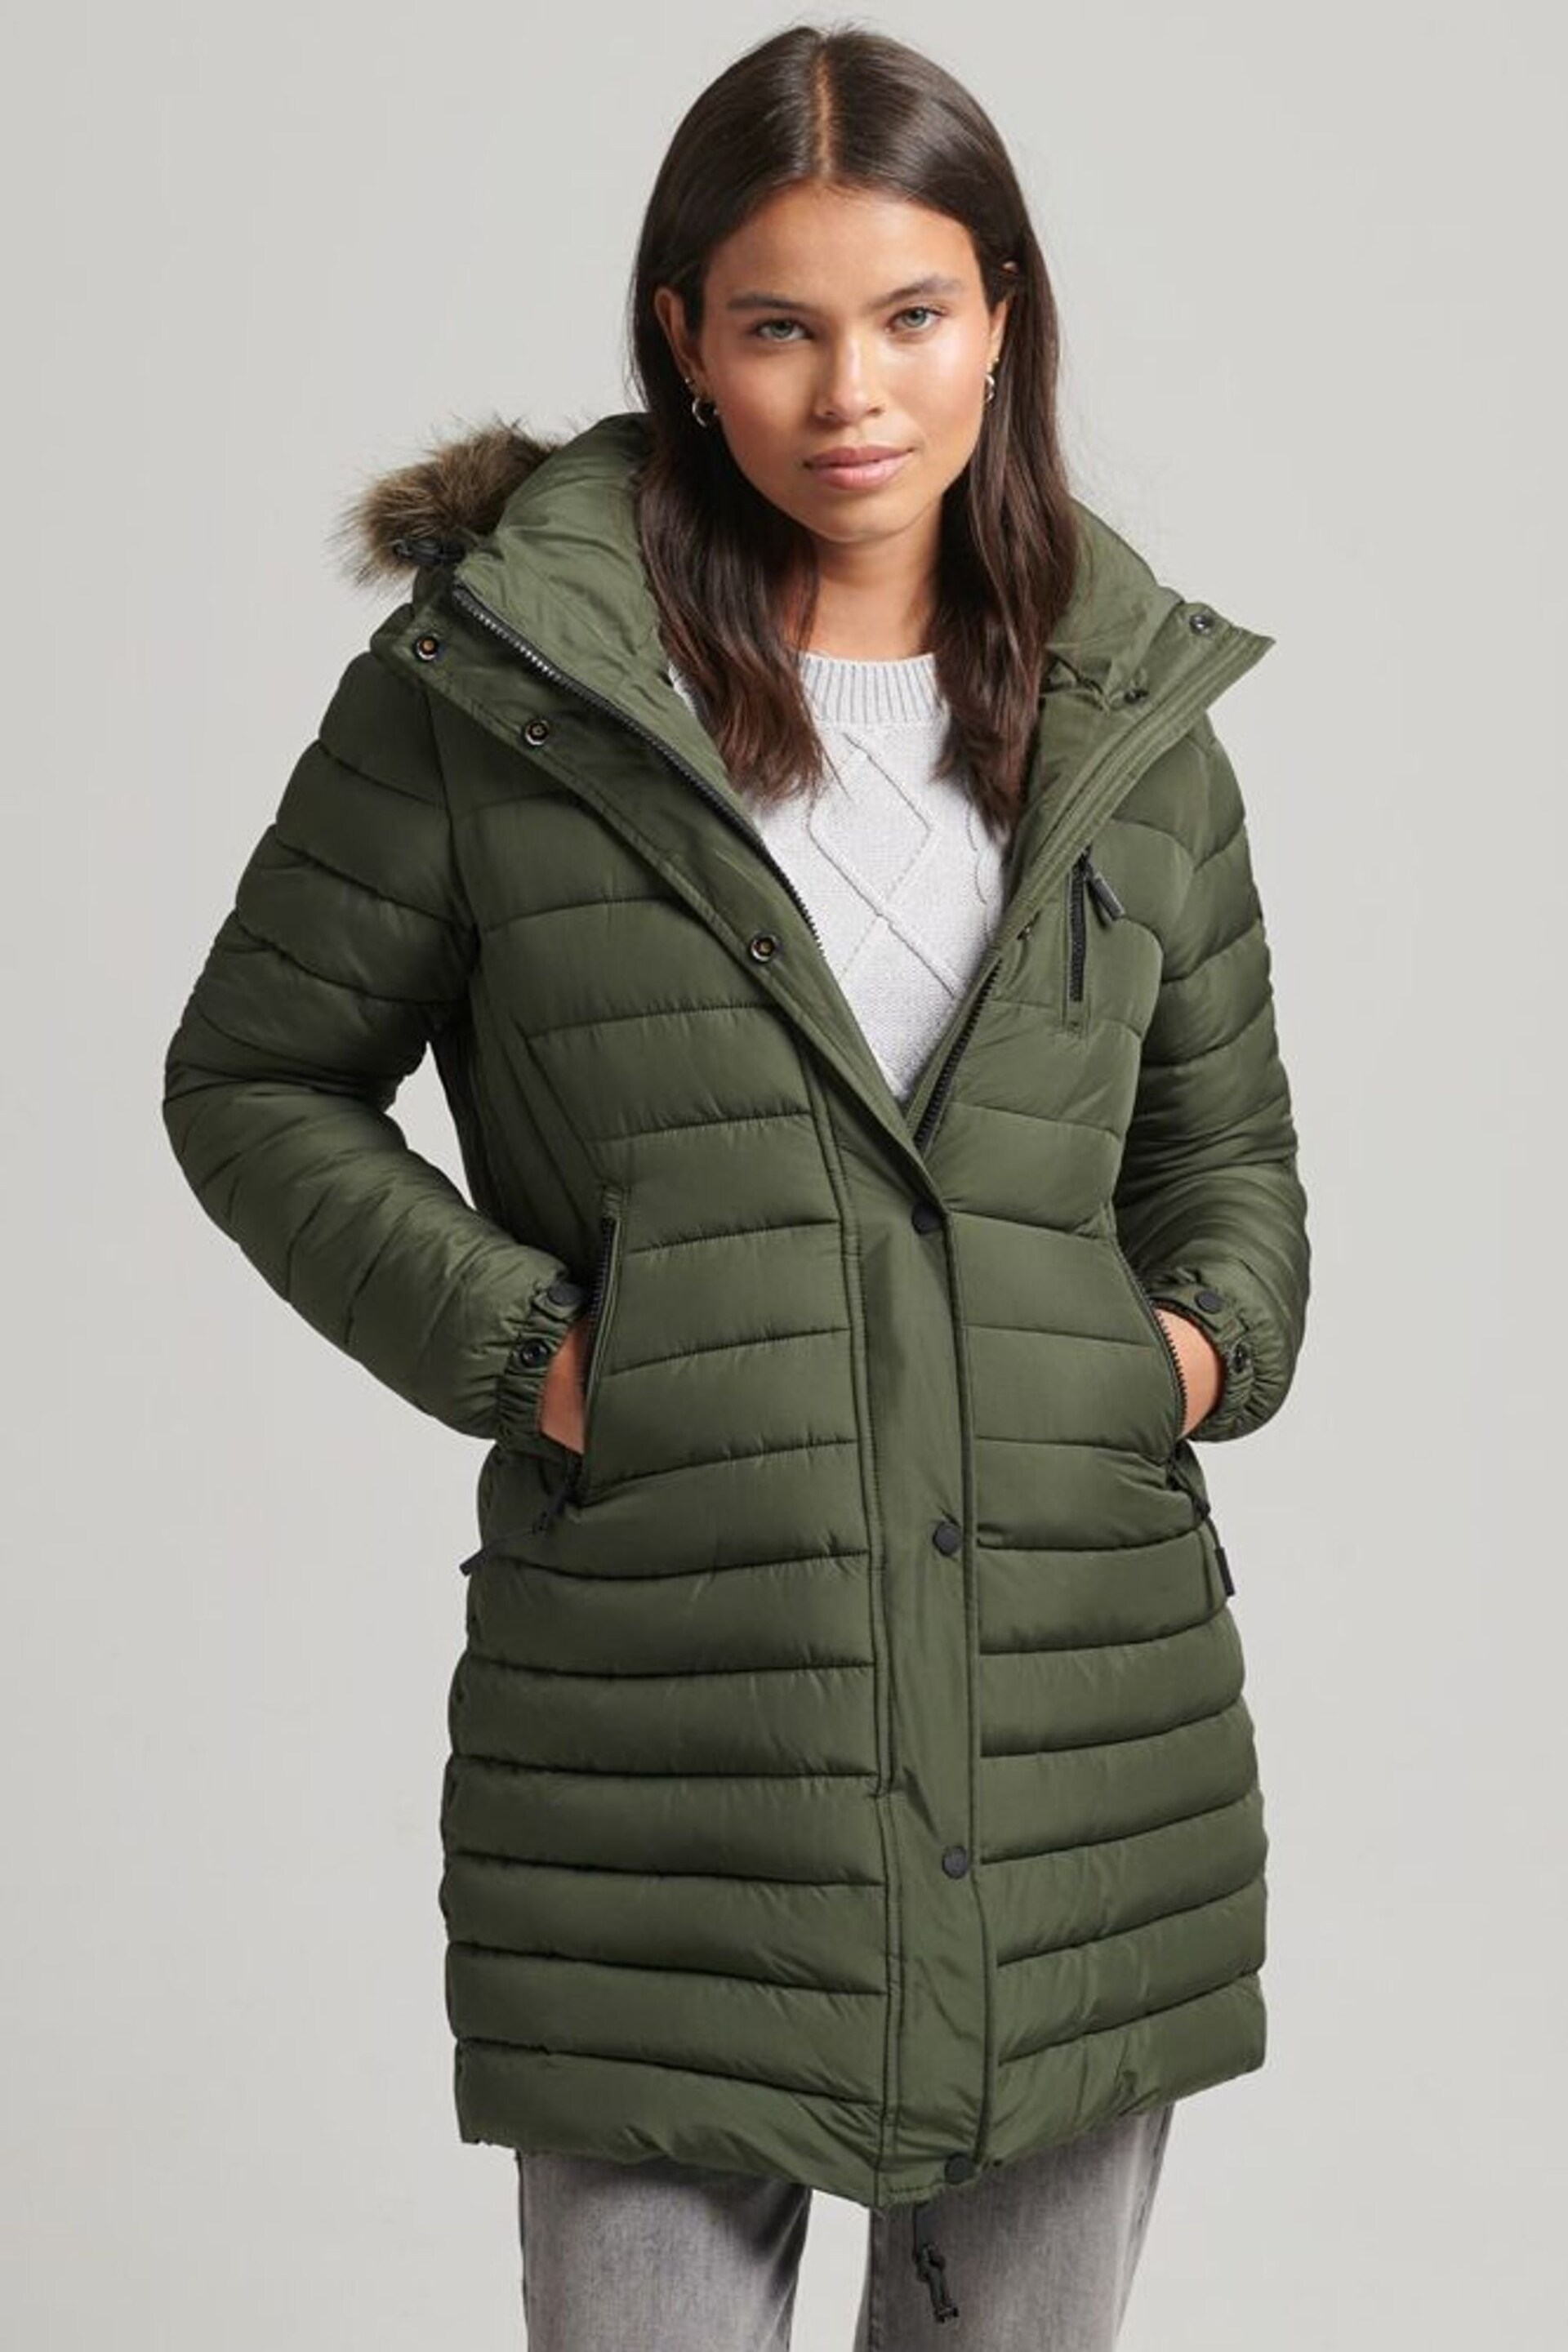 Superdry Green Faux Fur Hooded Mid Length Puffer Jacket - Image 1 of 7